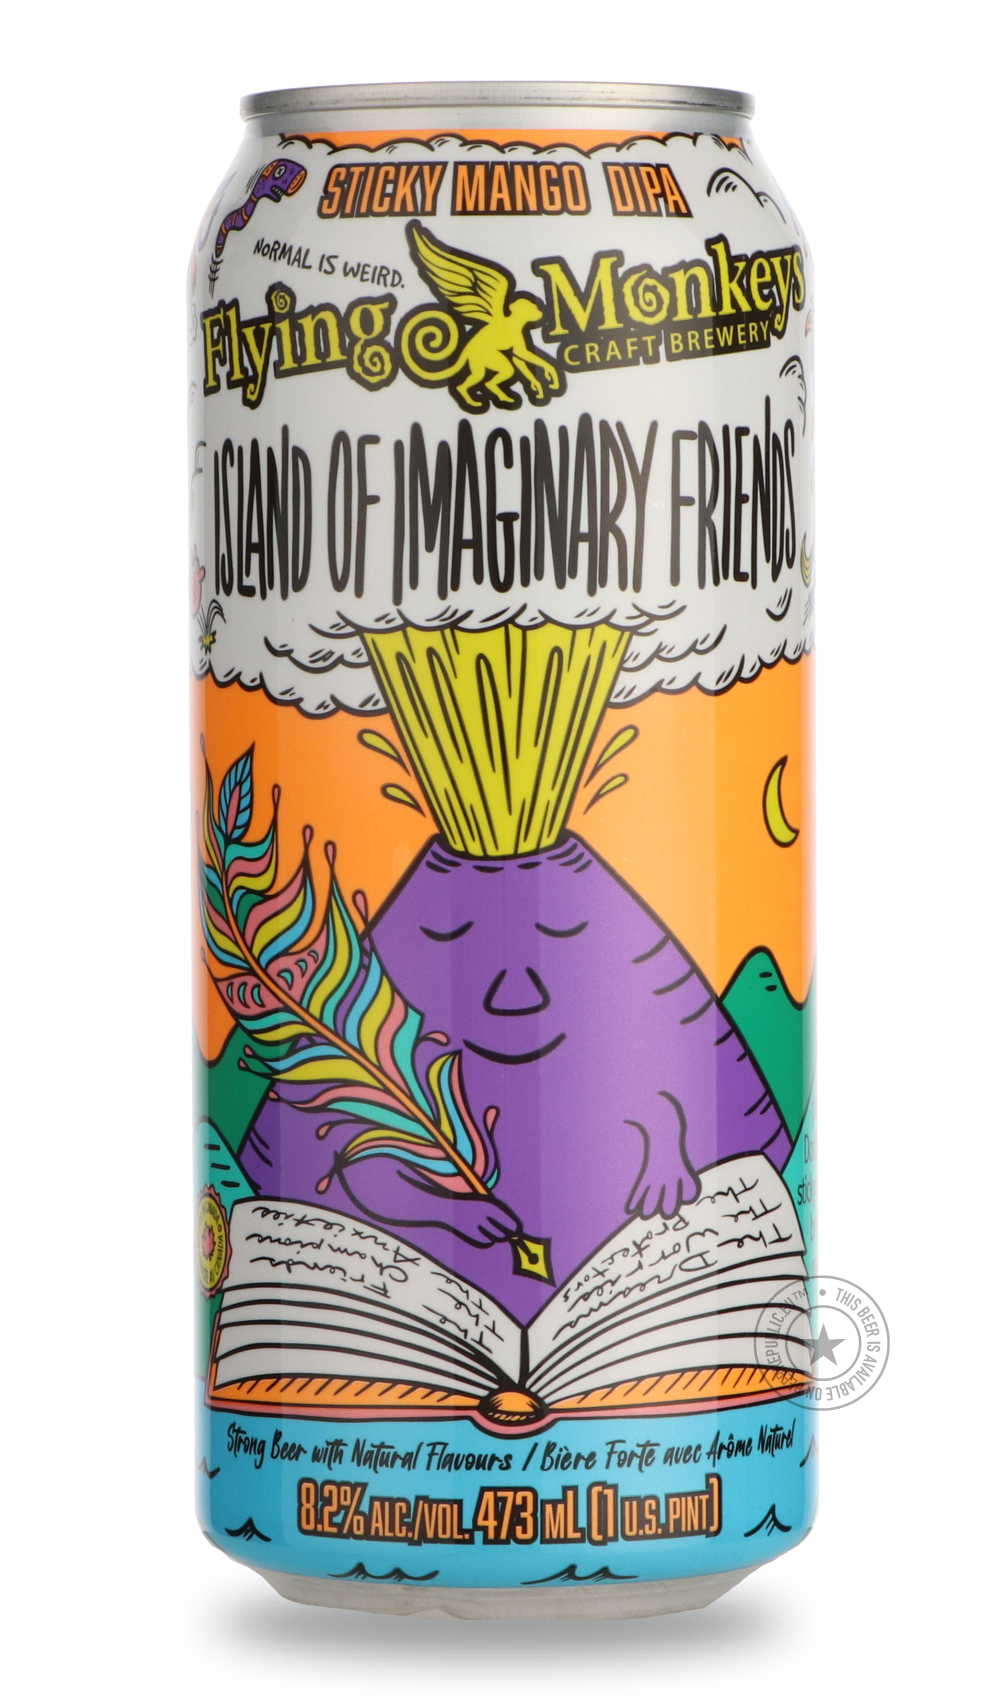 -Flying Monkeys- Island of Imaginary Friends-IPA- Only @ Beer Republic - The best online beer store for American & Canadian craft beer - Buy beer online from the USA and Canada - Bier online kopen - Amerikaans bier kopen - Craft beer store - Craft beer kopen - Amerikanisch bier kaufen - Bier online kaufen - Acheter biere online - IPA - Stout - Porter - New England IPA - Hazy IPA - Imperial Stout - Barrel Aged - Barrel Aged Imperial Stout - Brown - Dark beer - Blond - Blonde - Pilsner - Lager - Wheat - Weize